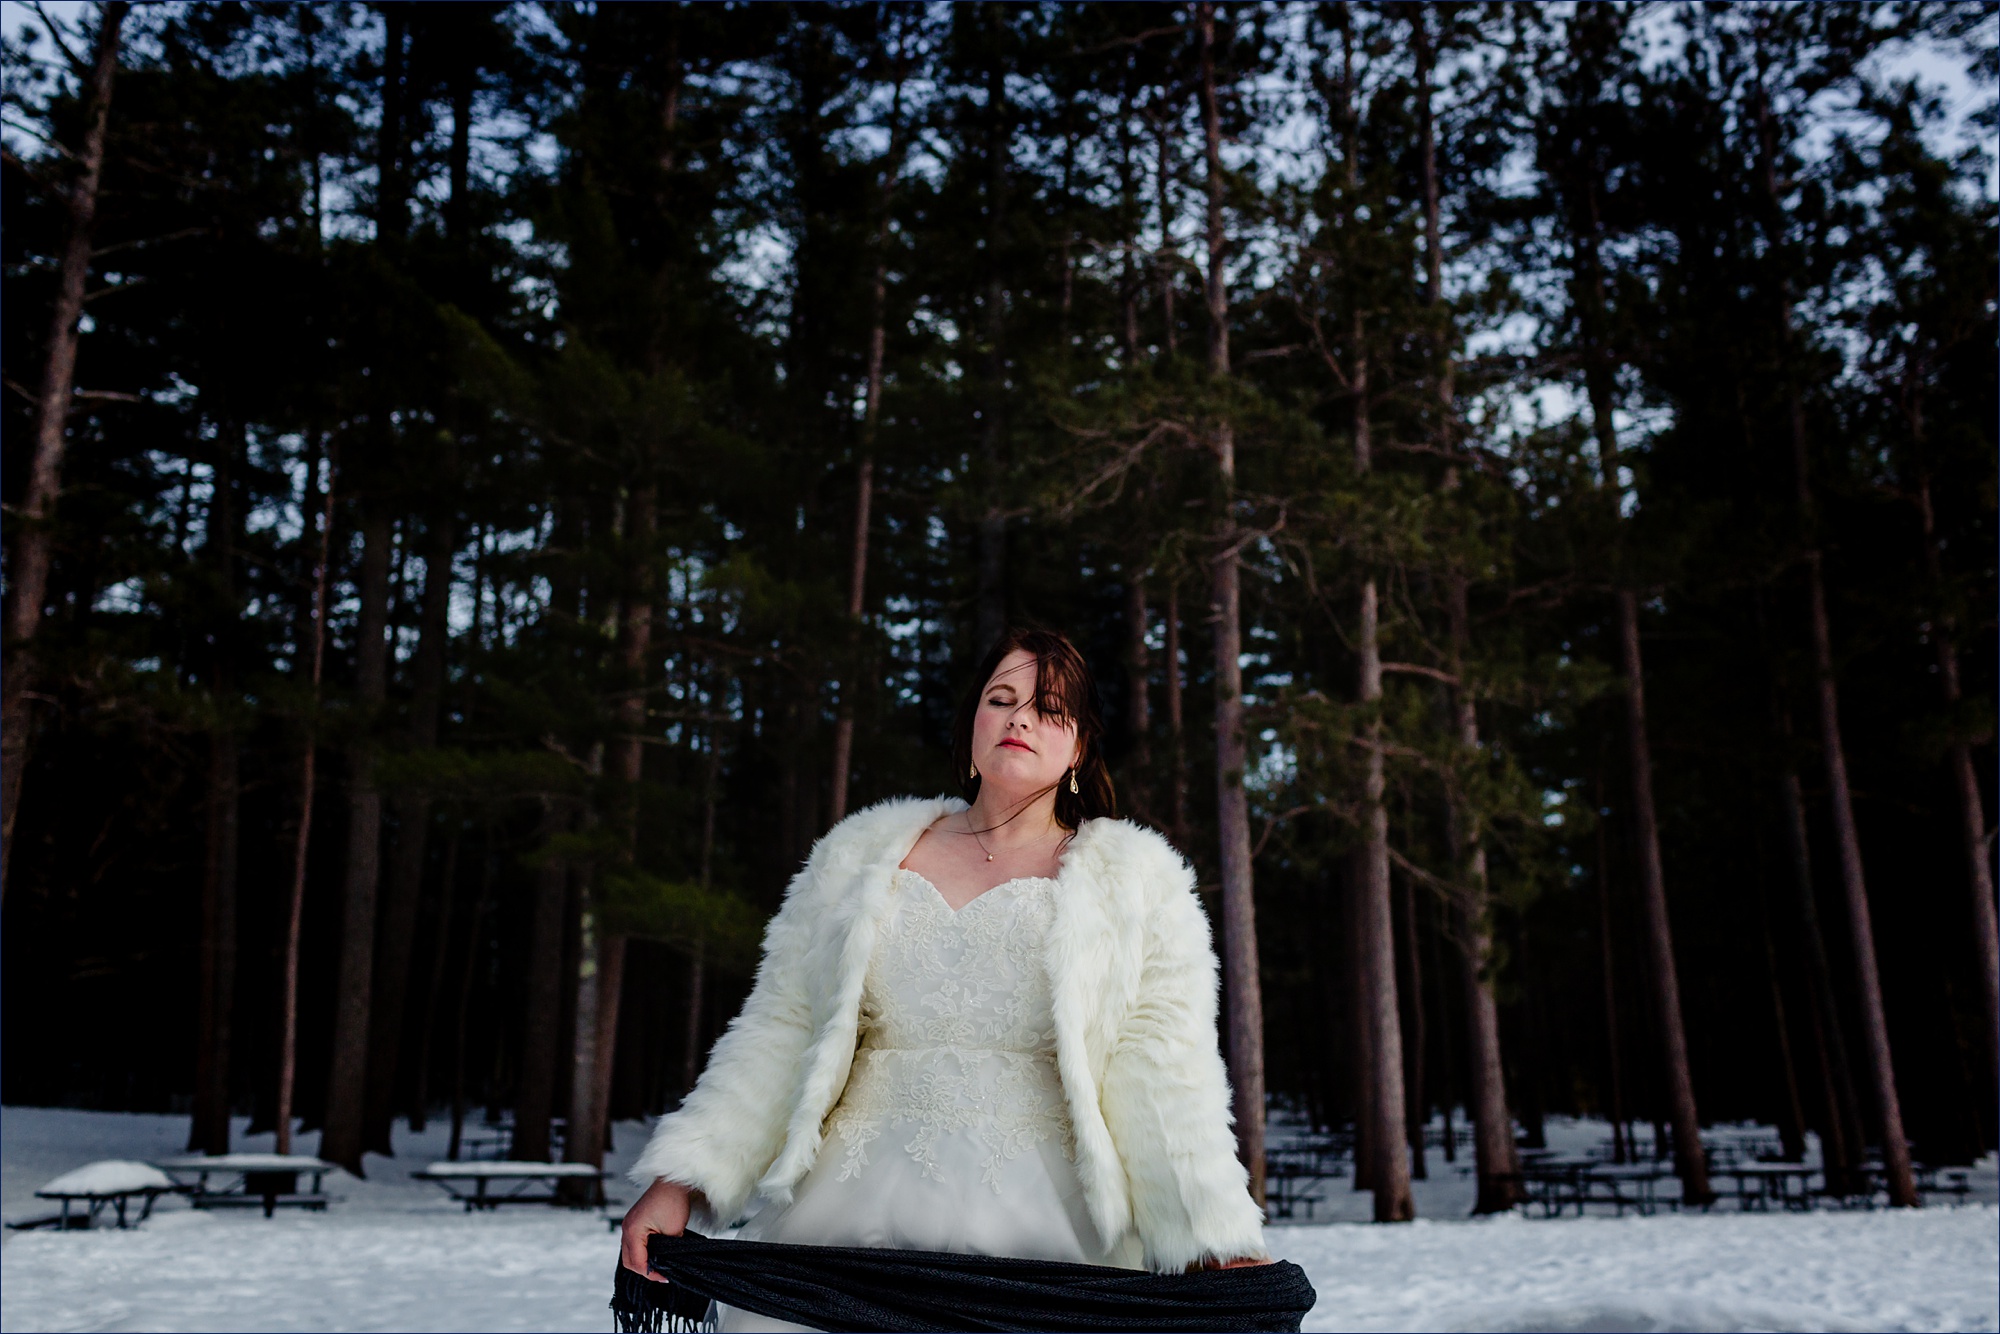 The bride on her NH elopement day in the winter woods